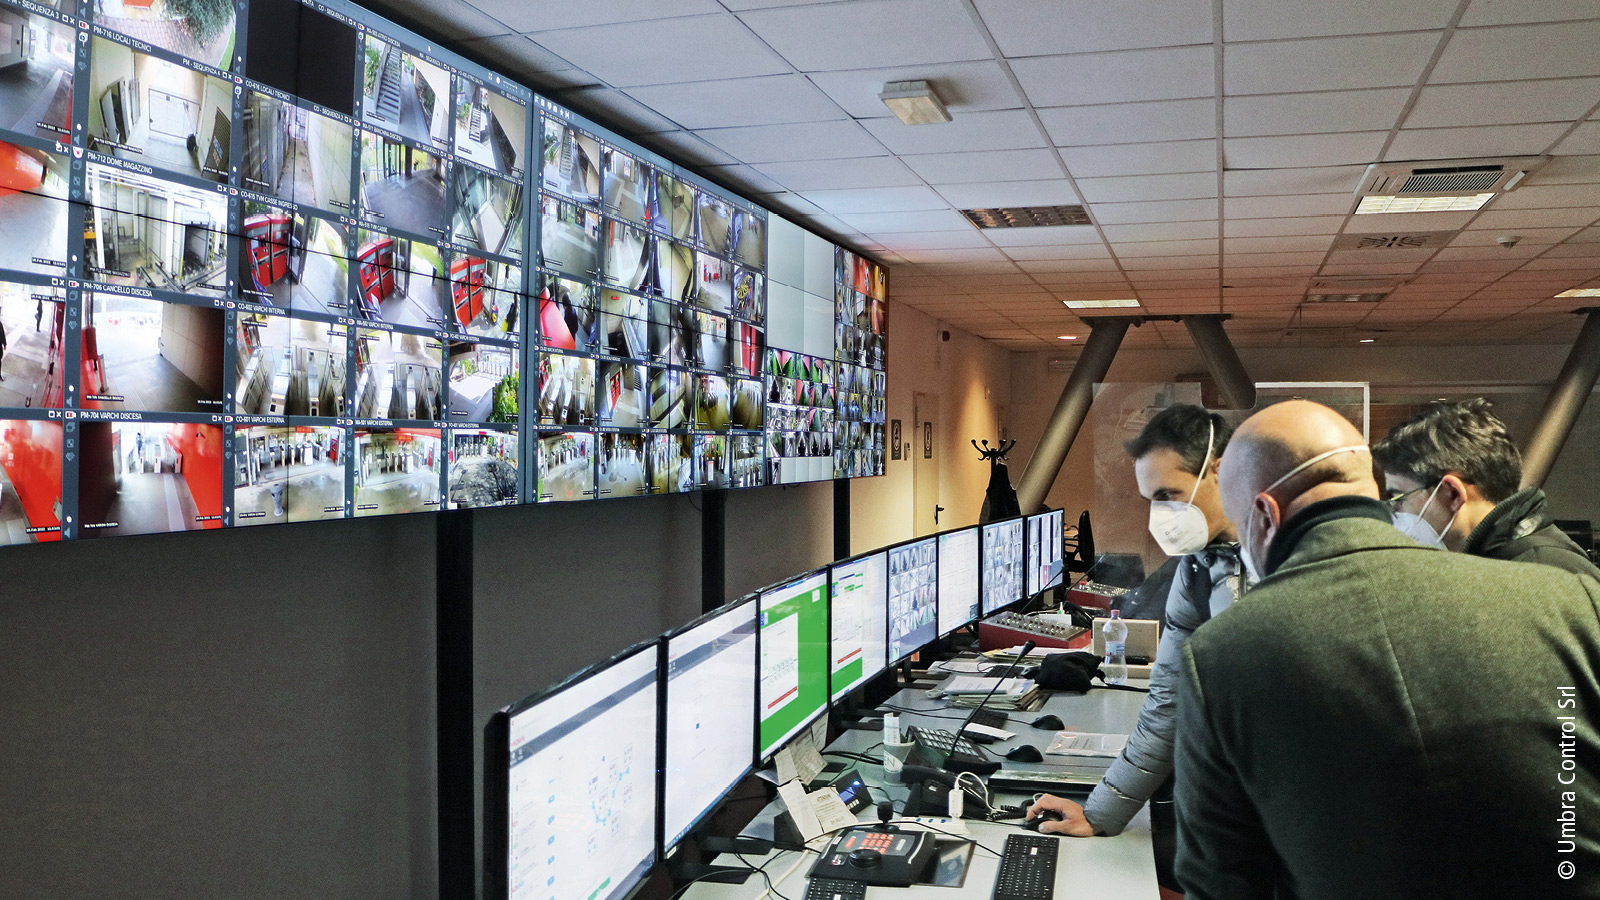 Around 1,500 inputs and outputs are securely transmitted to the control center via around 20 Beckhoff controllers and additional remote I/Os, where they are monitored and controlled using the Visiosuite Scada software. 